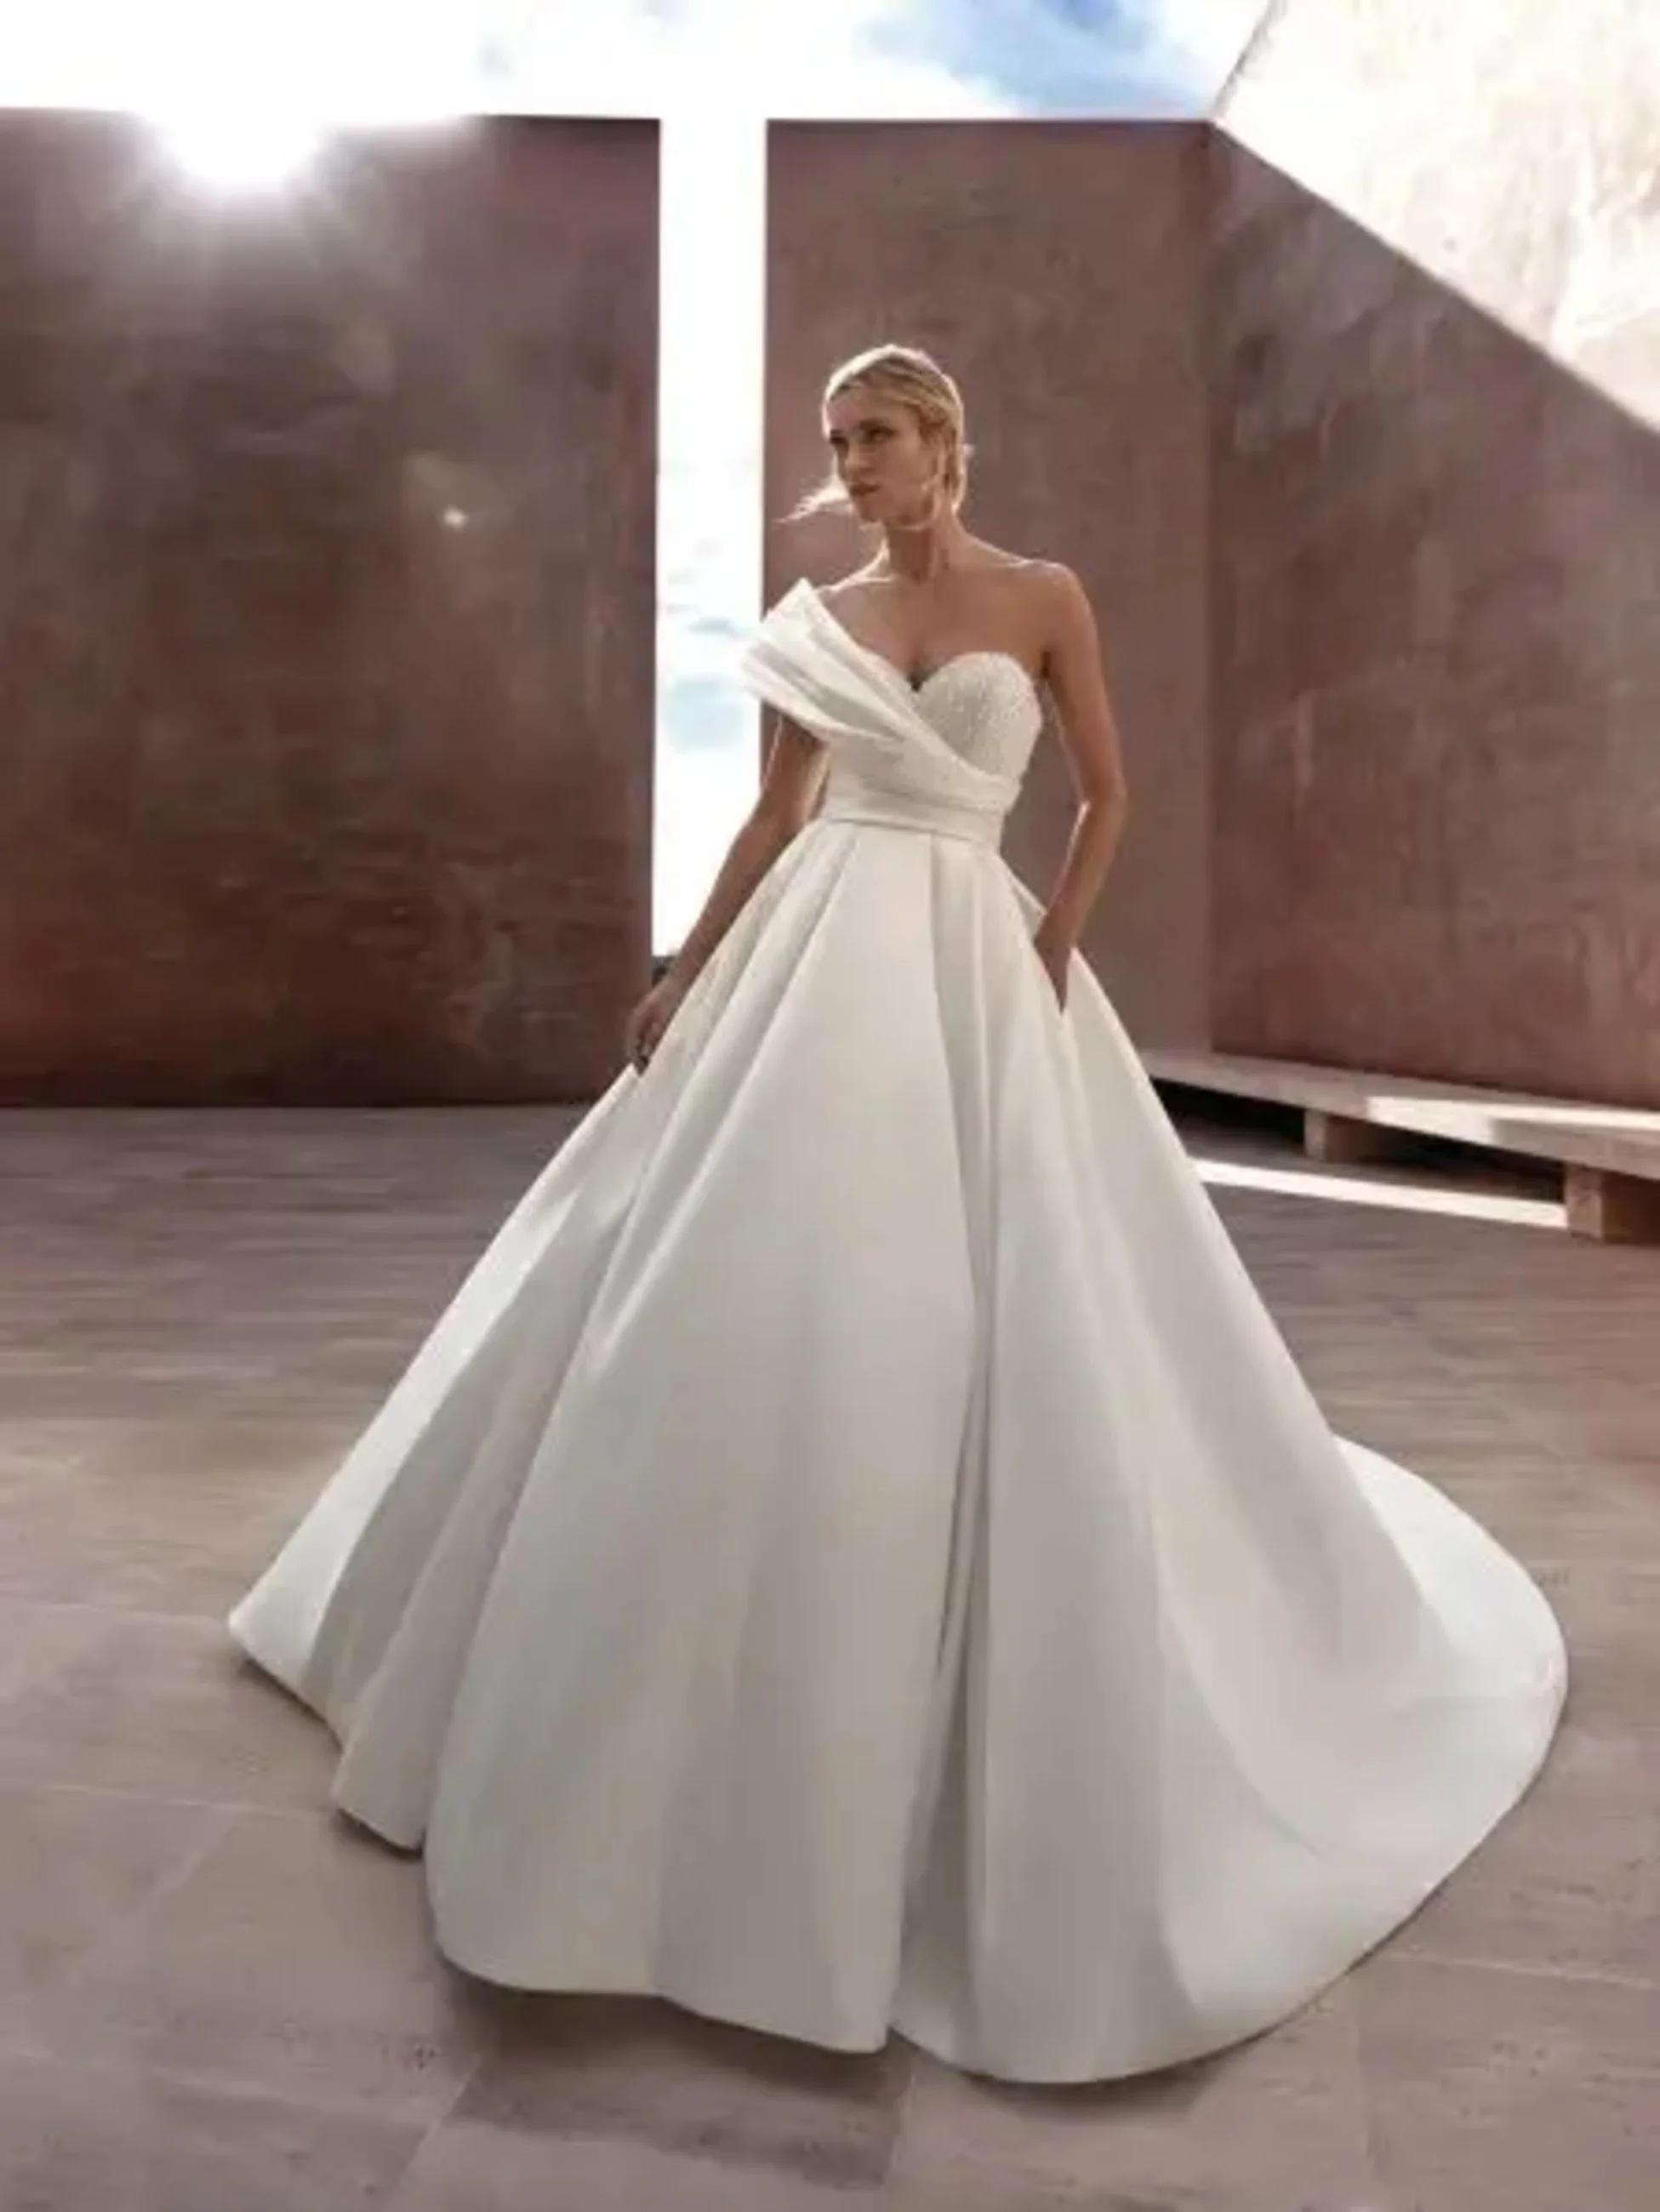 Model wearing a gown by Pronovias